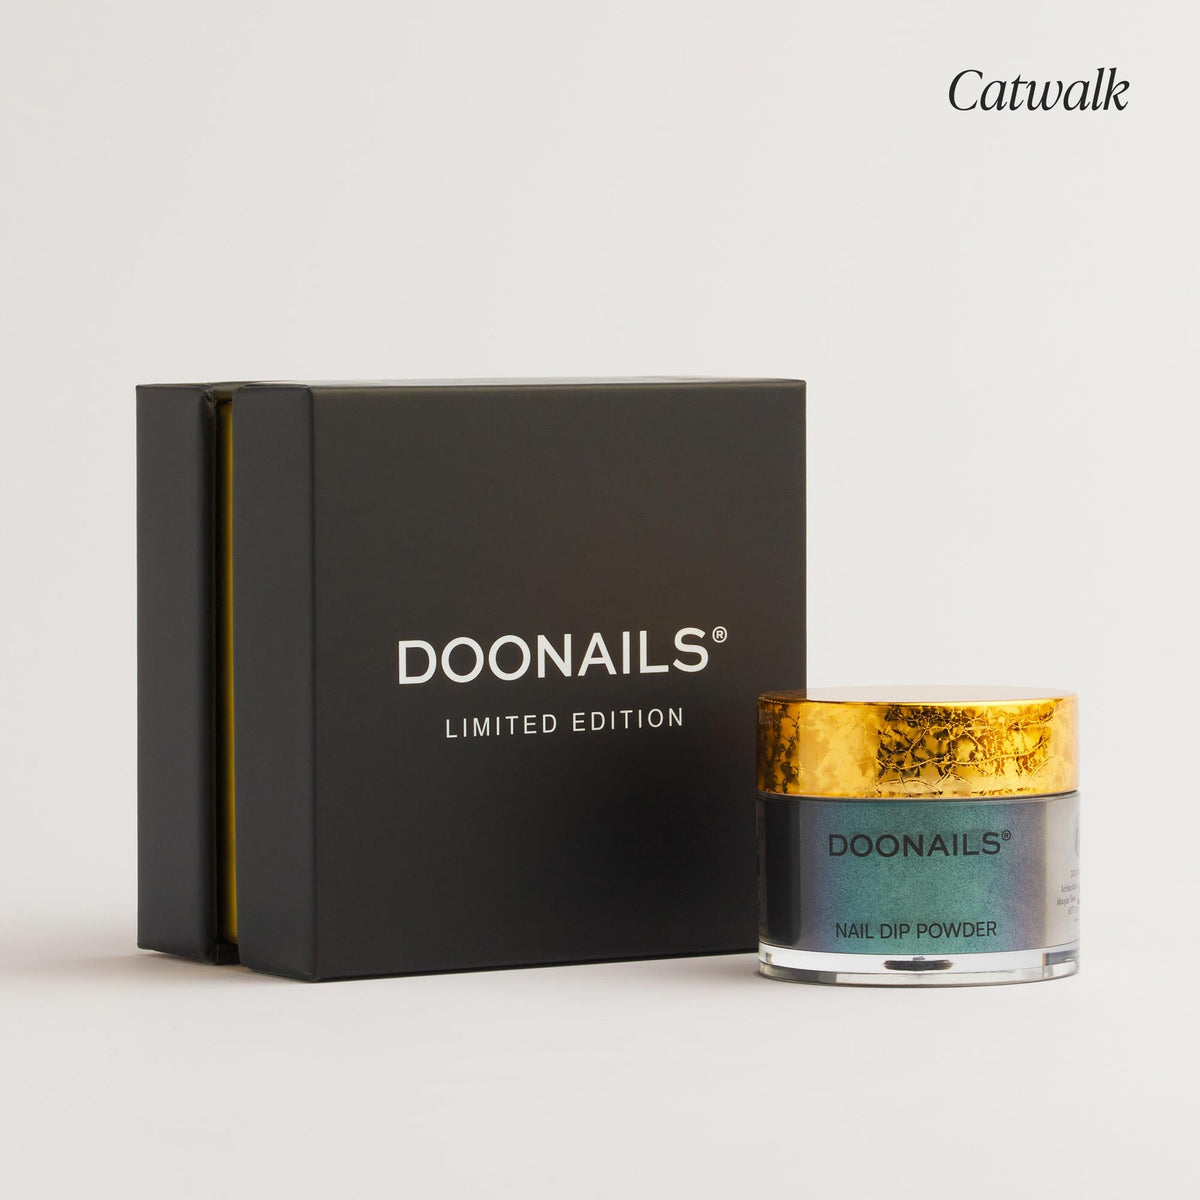 6. Doonails Limited Edition